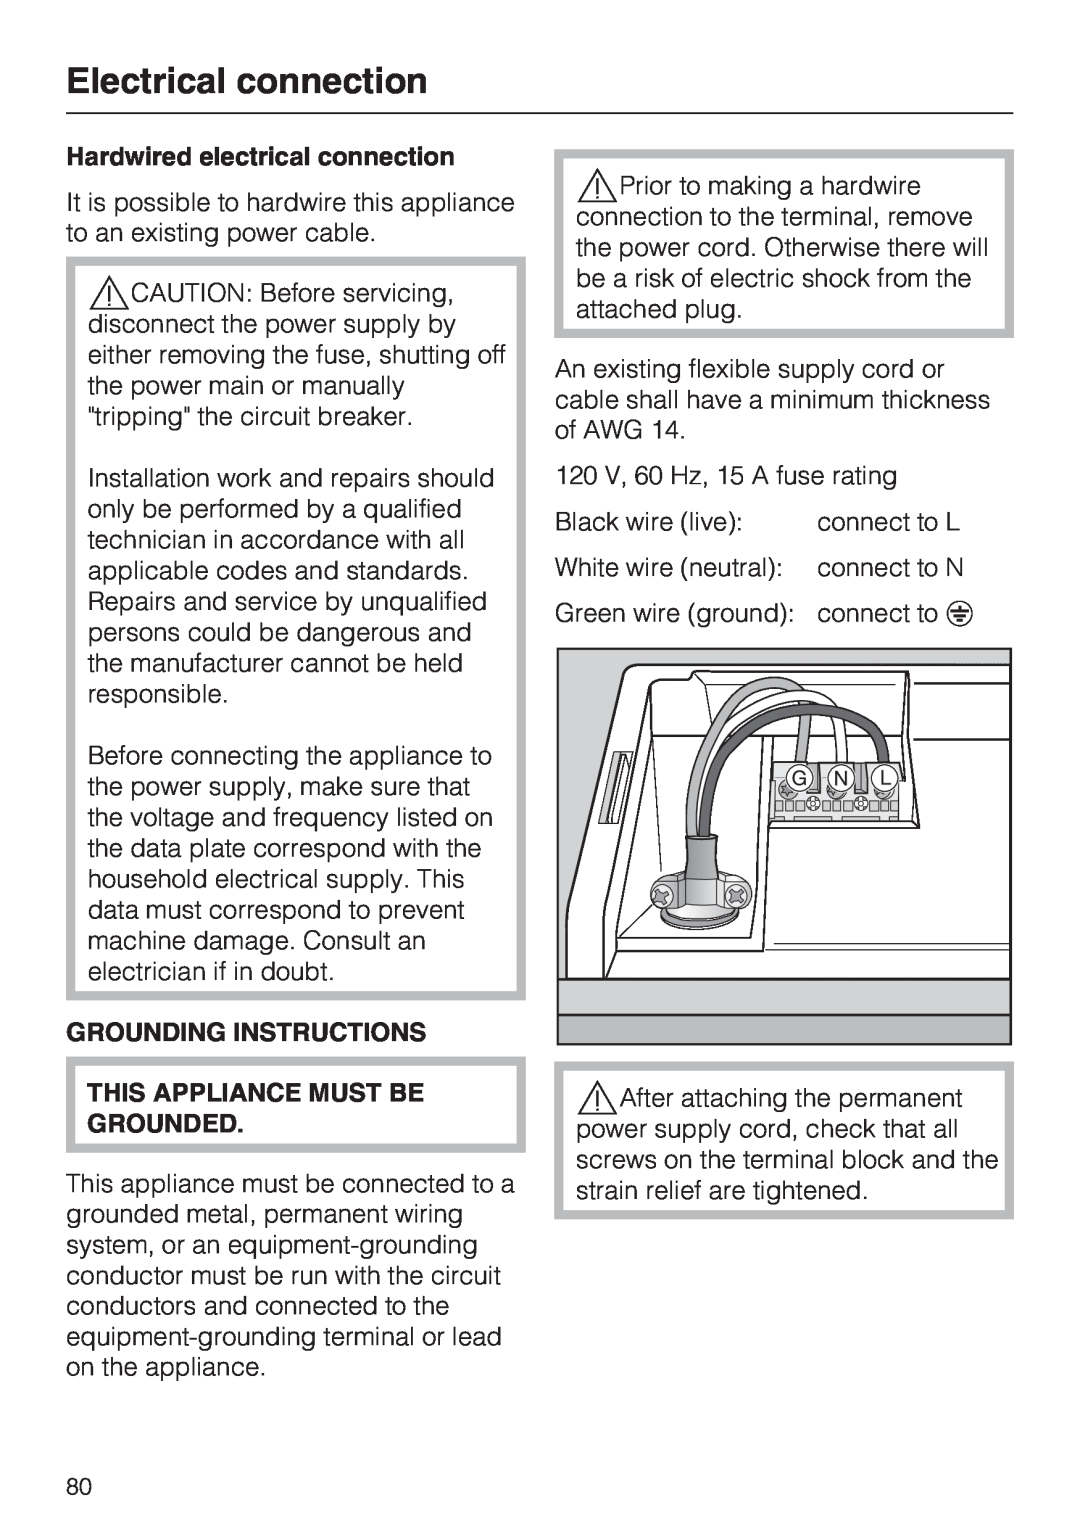 Miele G 5970, G 5795 manual Electrical connection, Hardwired electrical connection, Grounding Instructions 